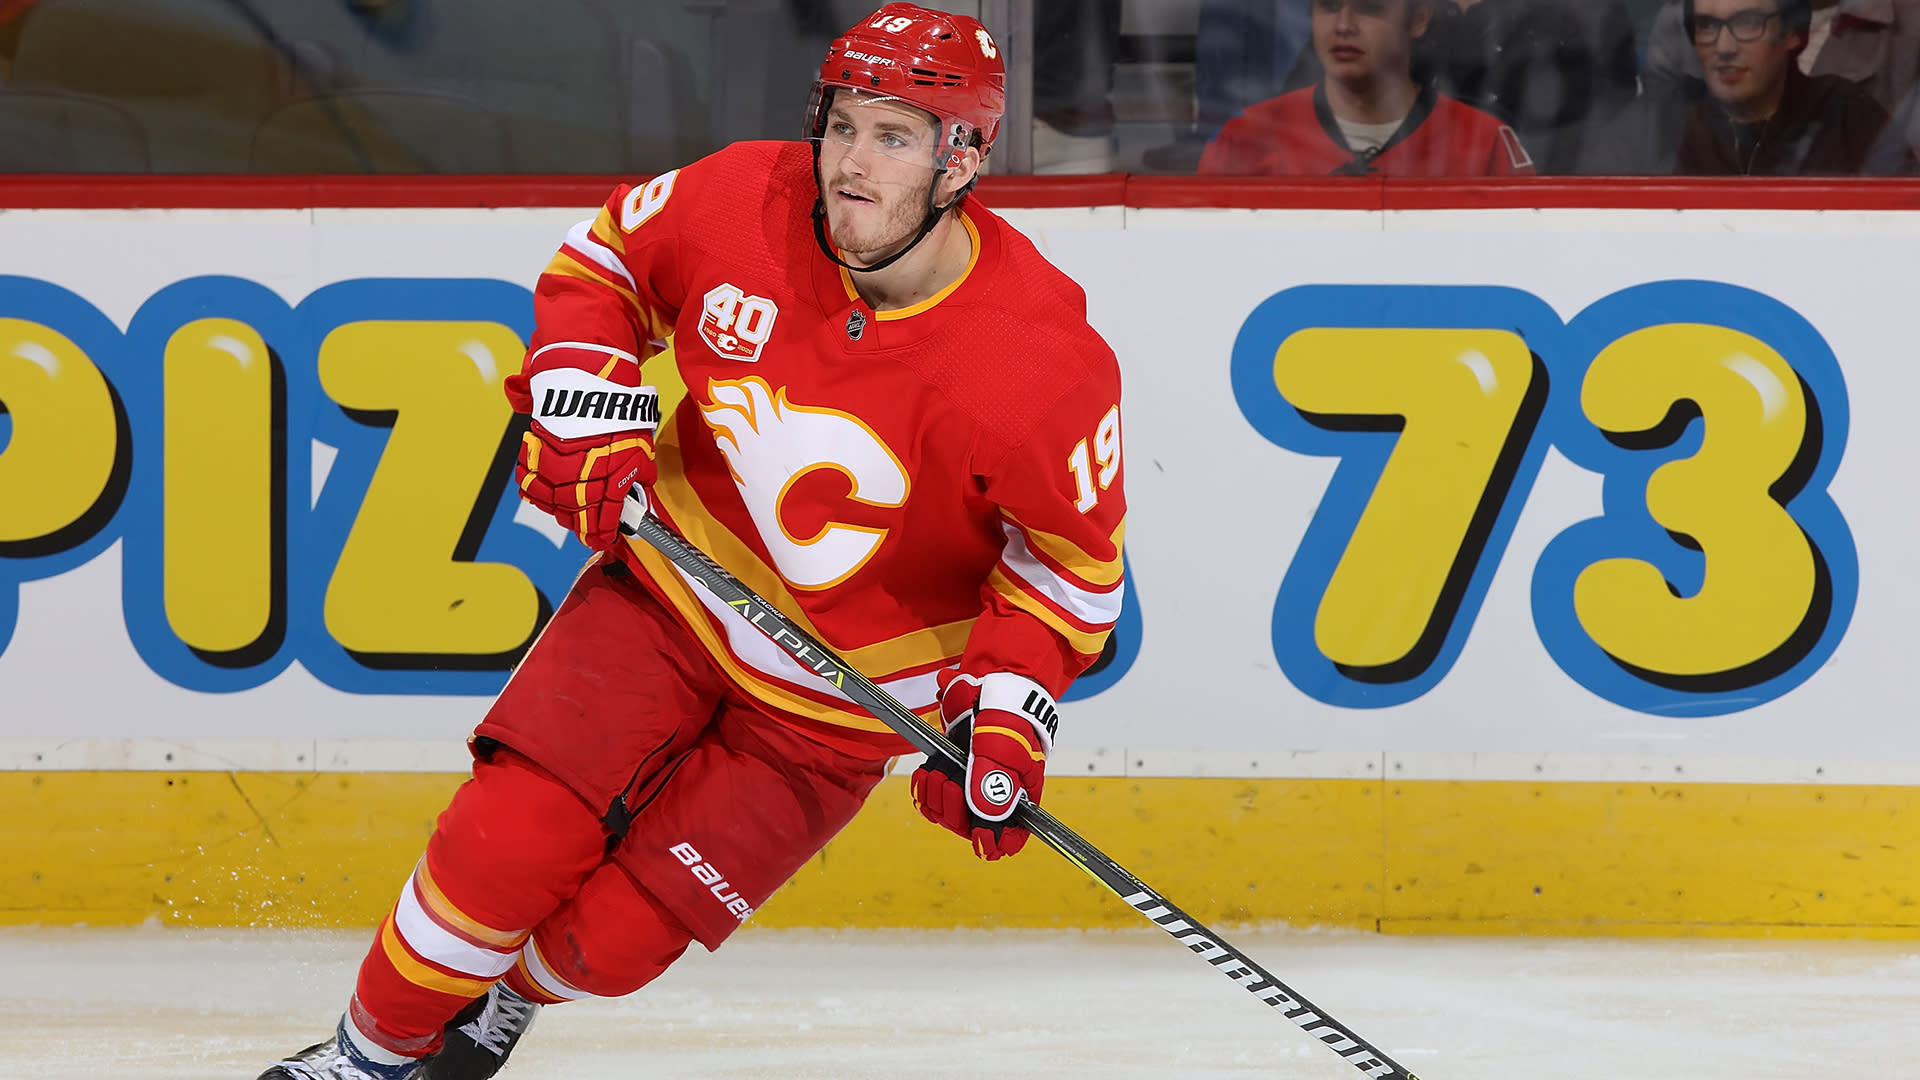 Matthew Tkachuk scores goal of the year candidate in final seconds of overtime - Yahoo Sports